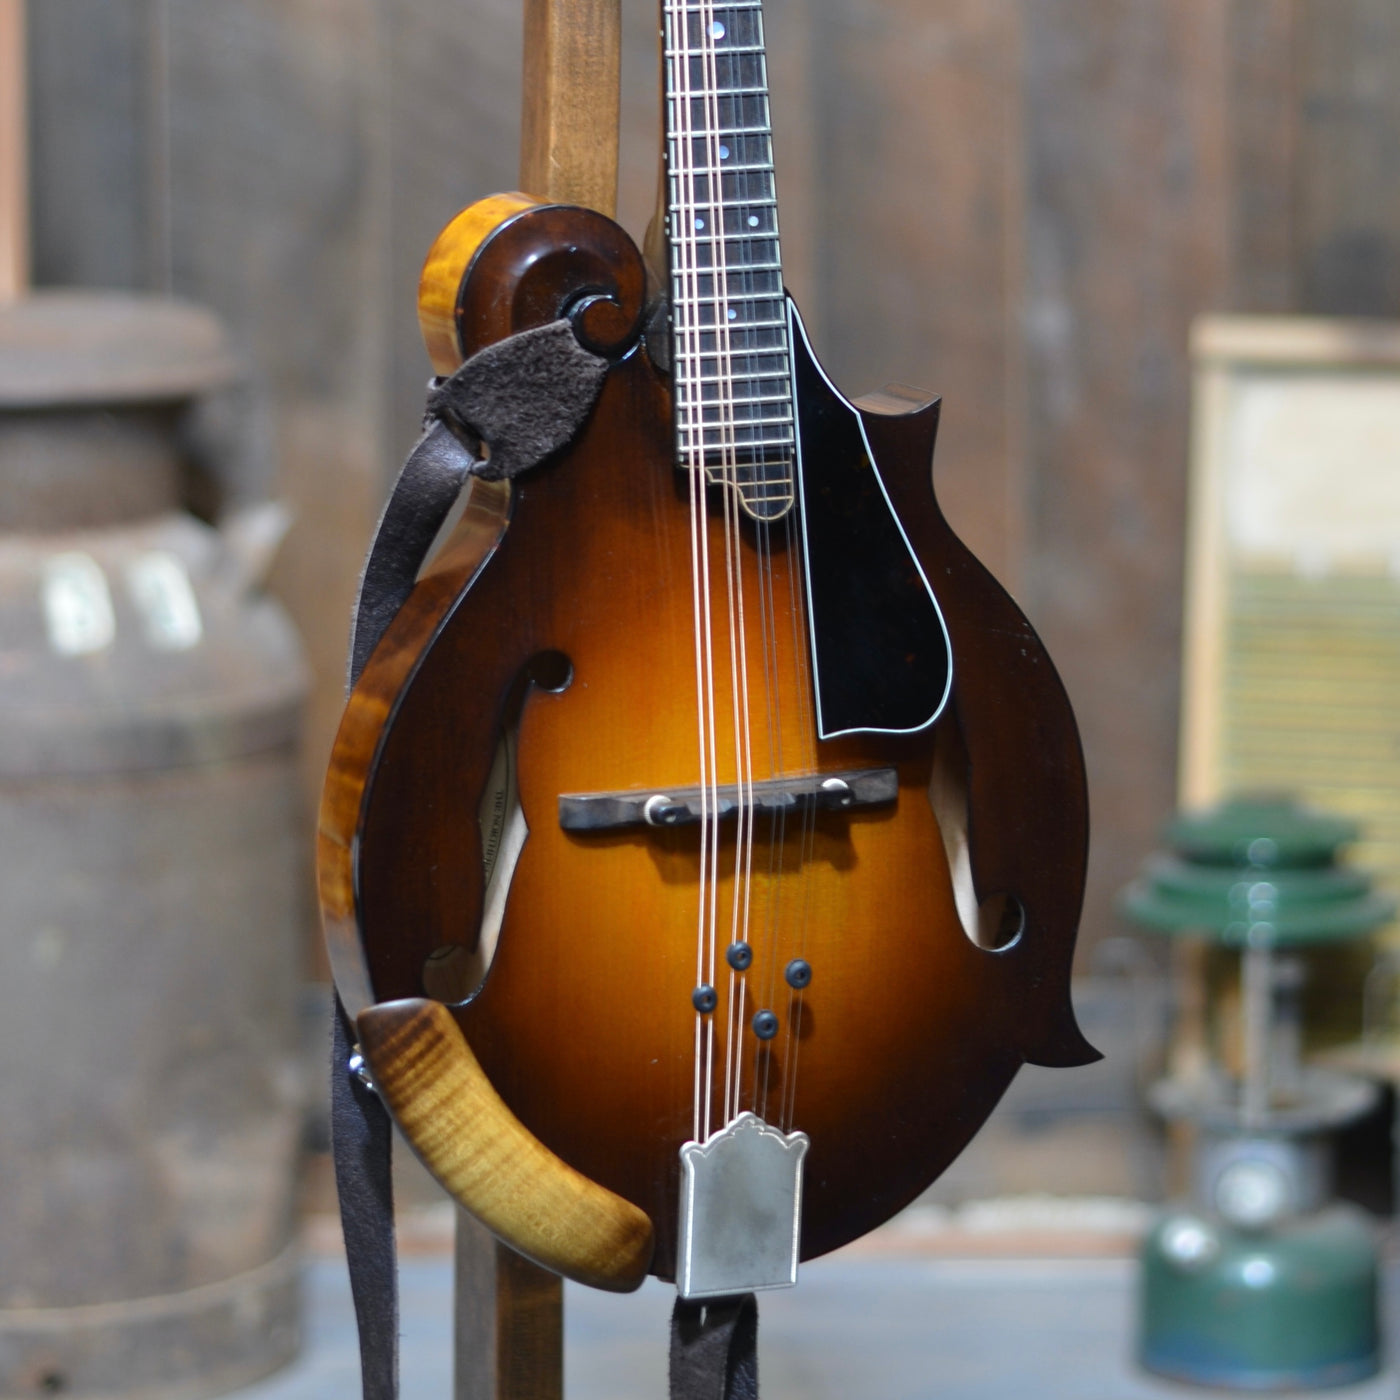 SOLD** 2009 Gold Star GF-200 (1952) Bow Tie - Used Banjo For Sale